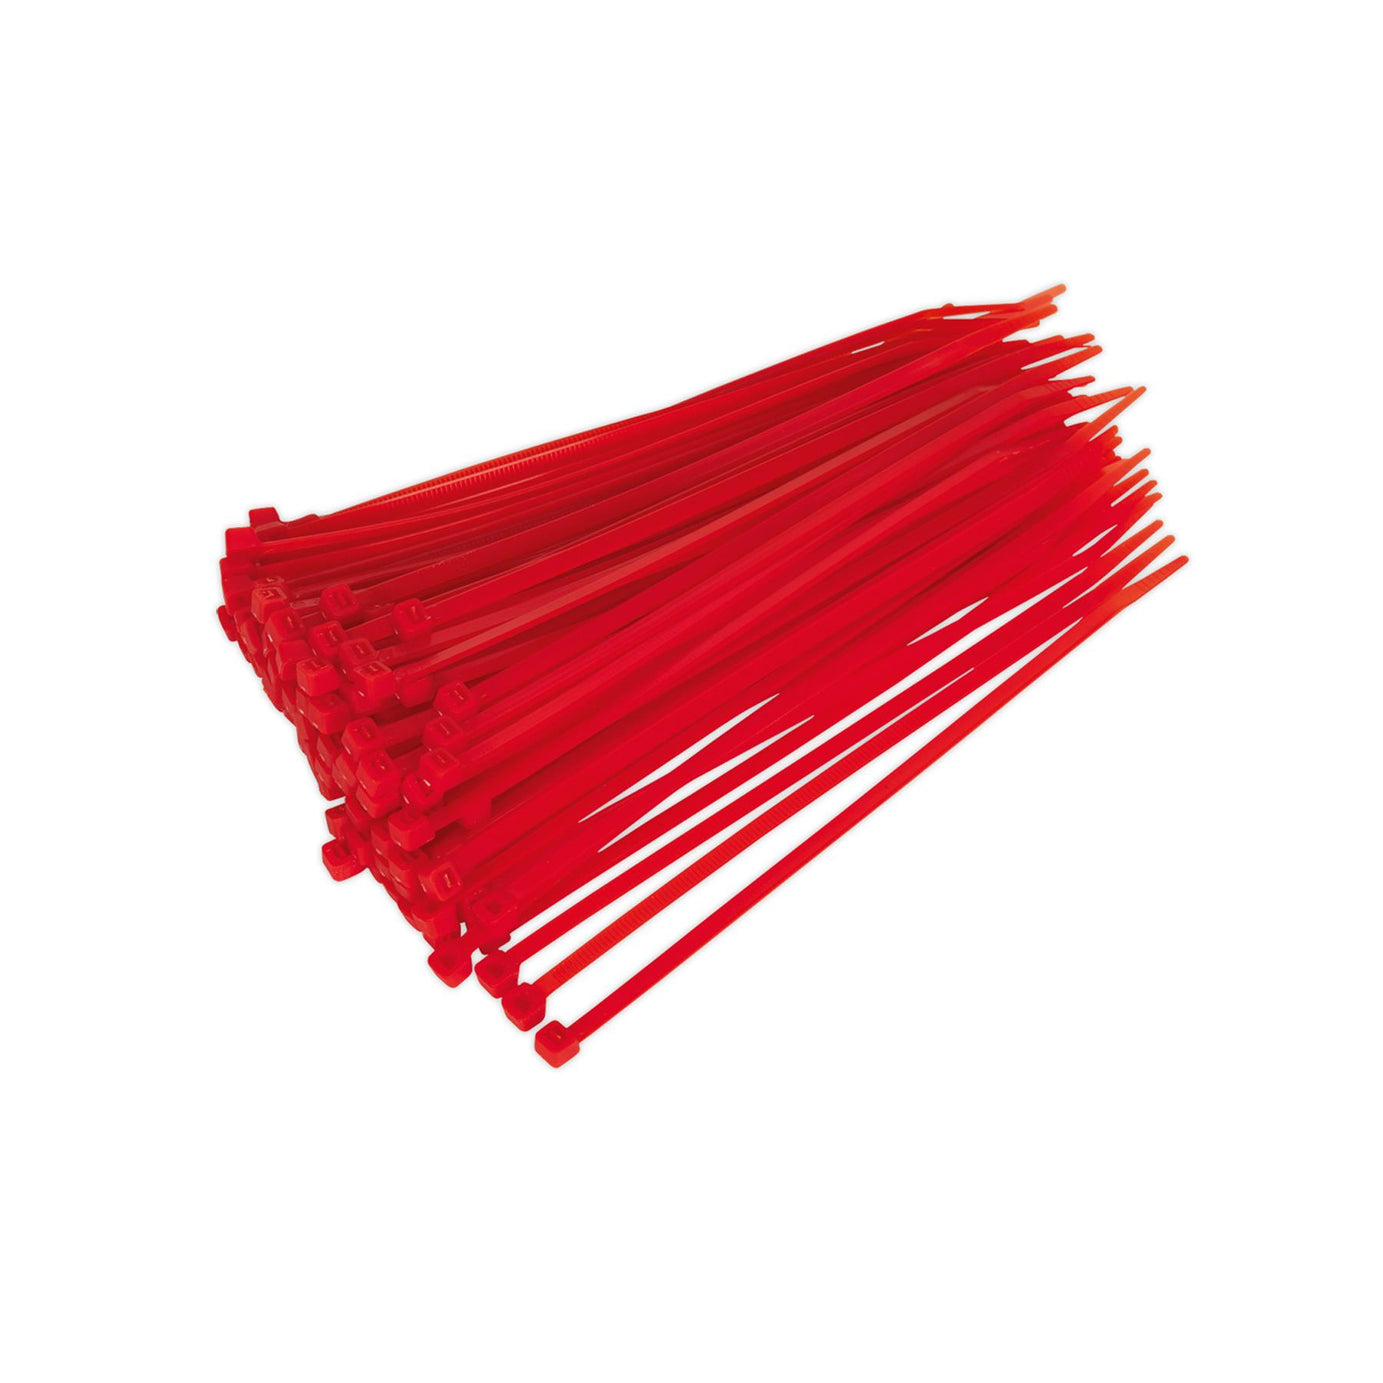 Sealey Cable Tie 200 x 4.4mm Red Pack of 100